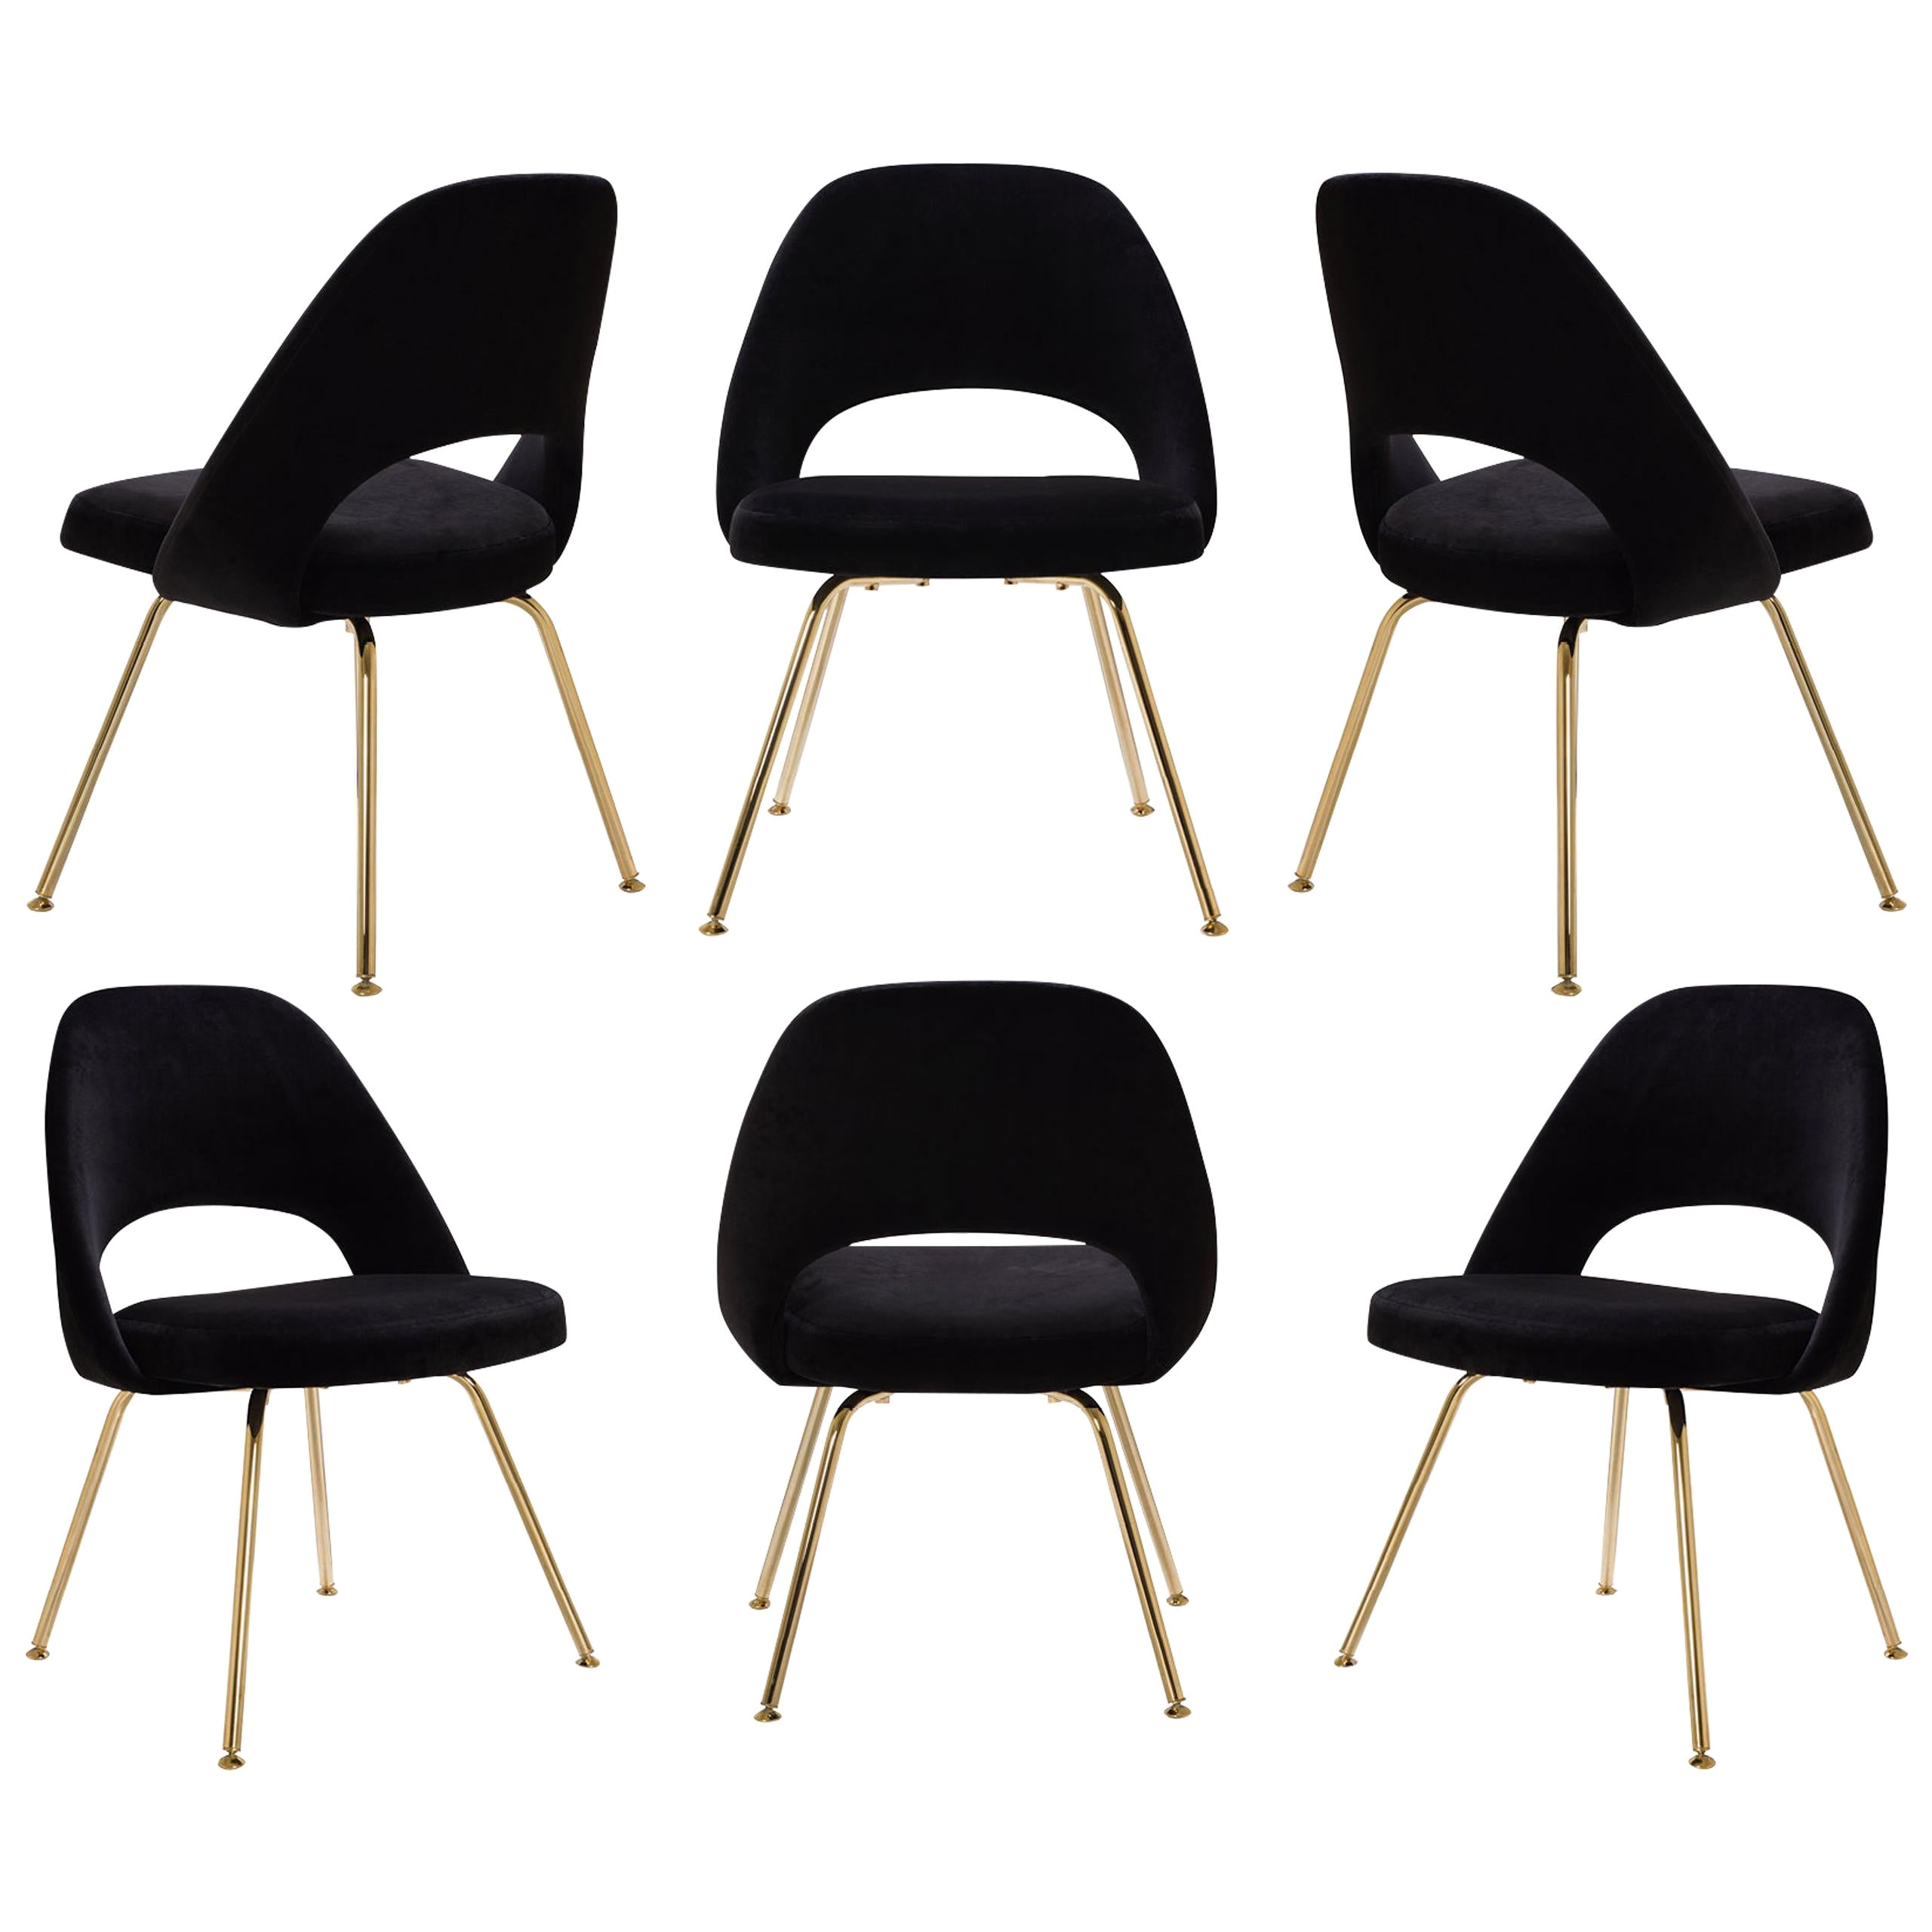 Saarinen Executive Armless Chairs in Noir Velvet, Gold Edition, Set of 6 For Sale